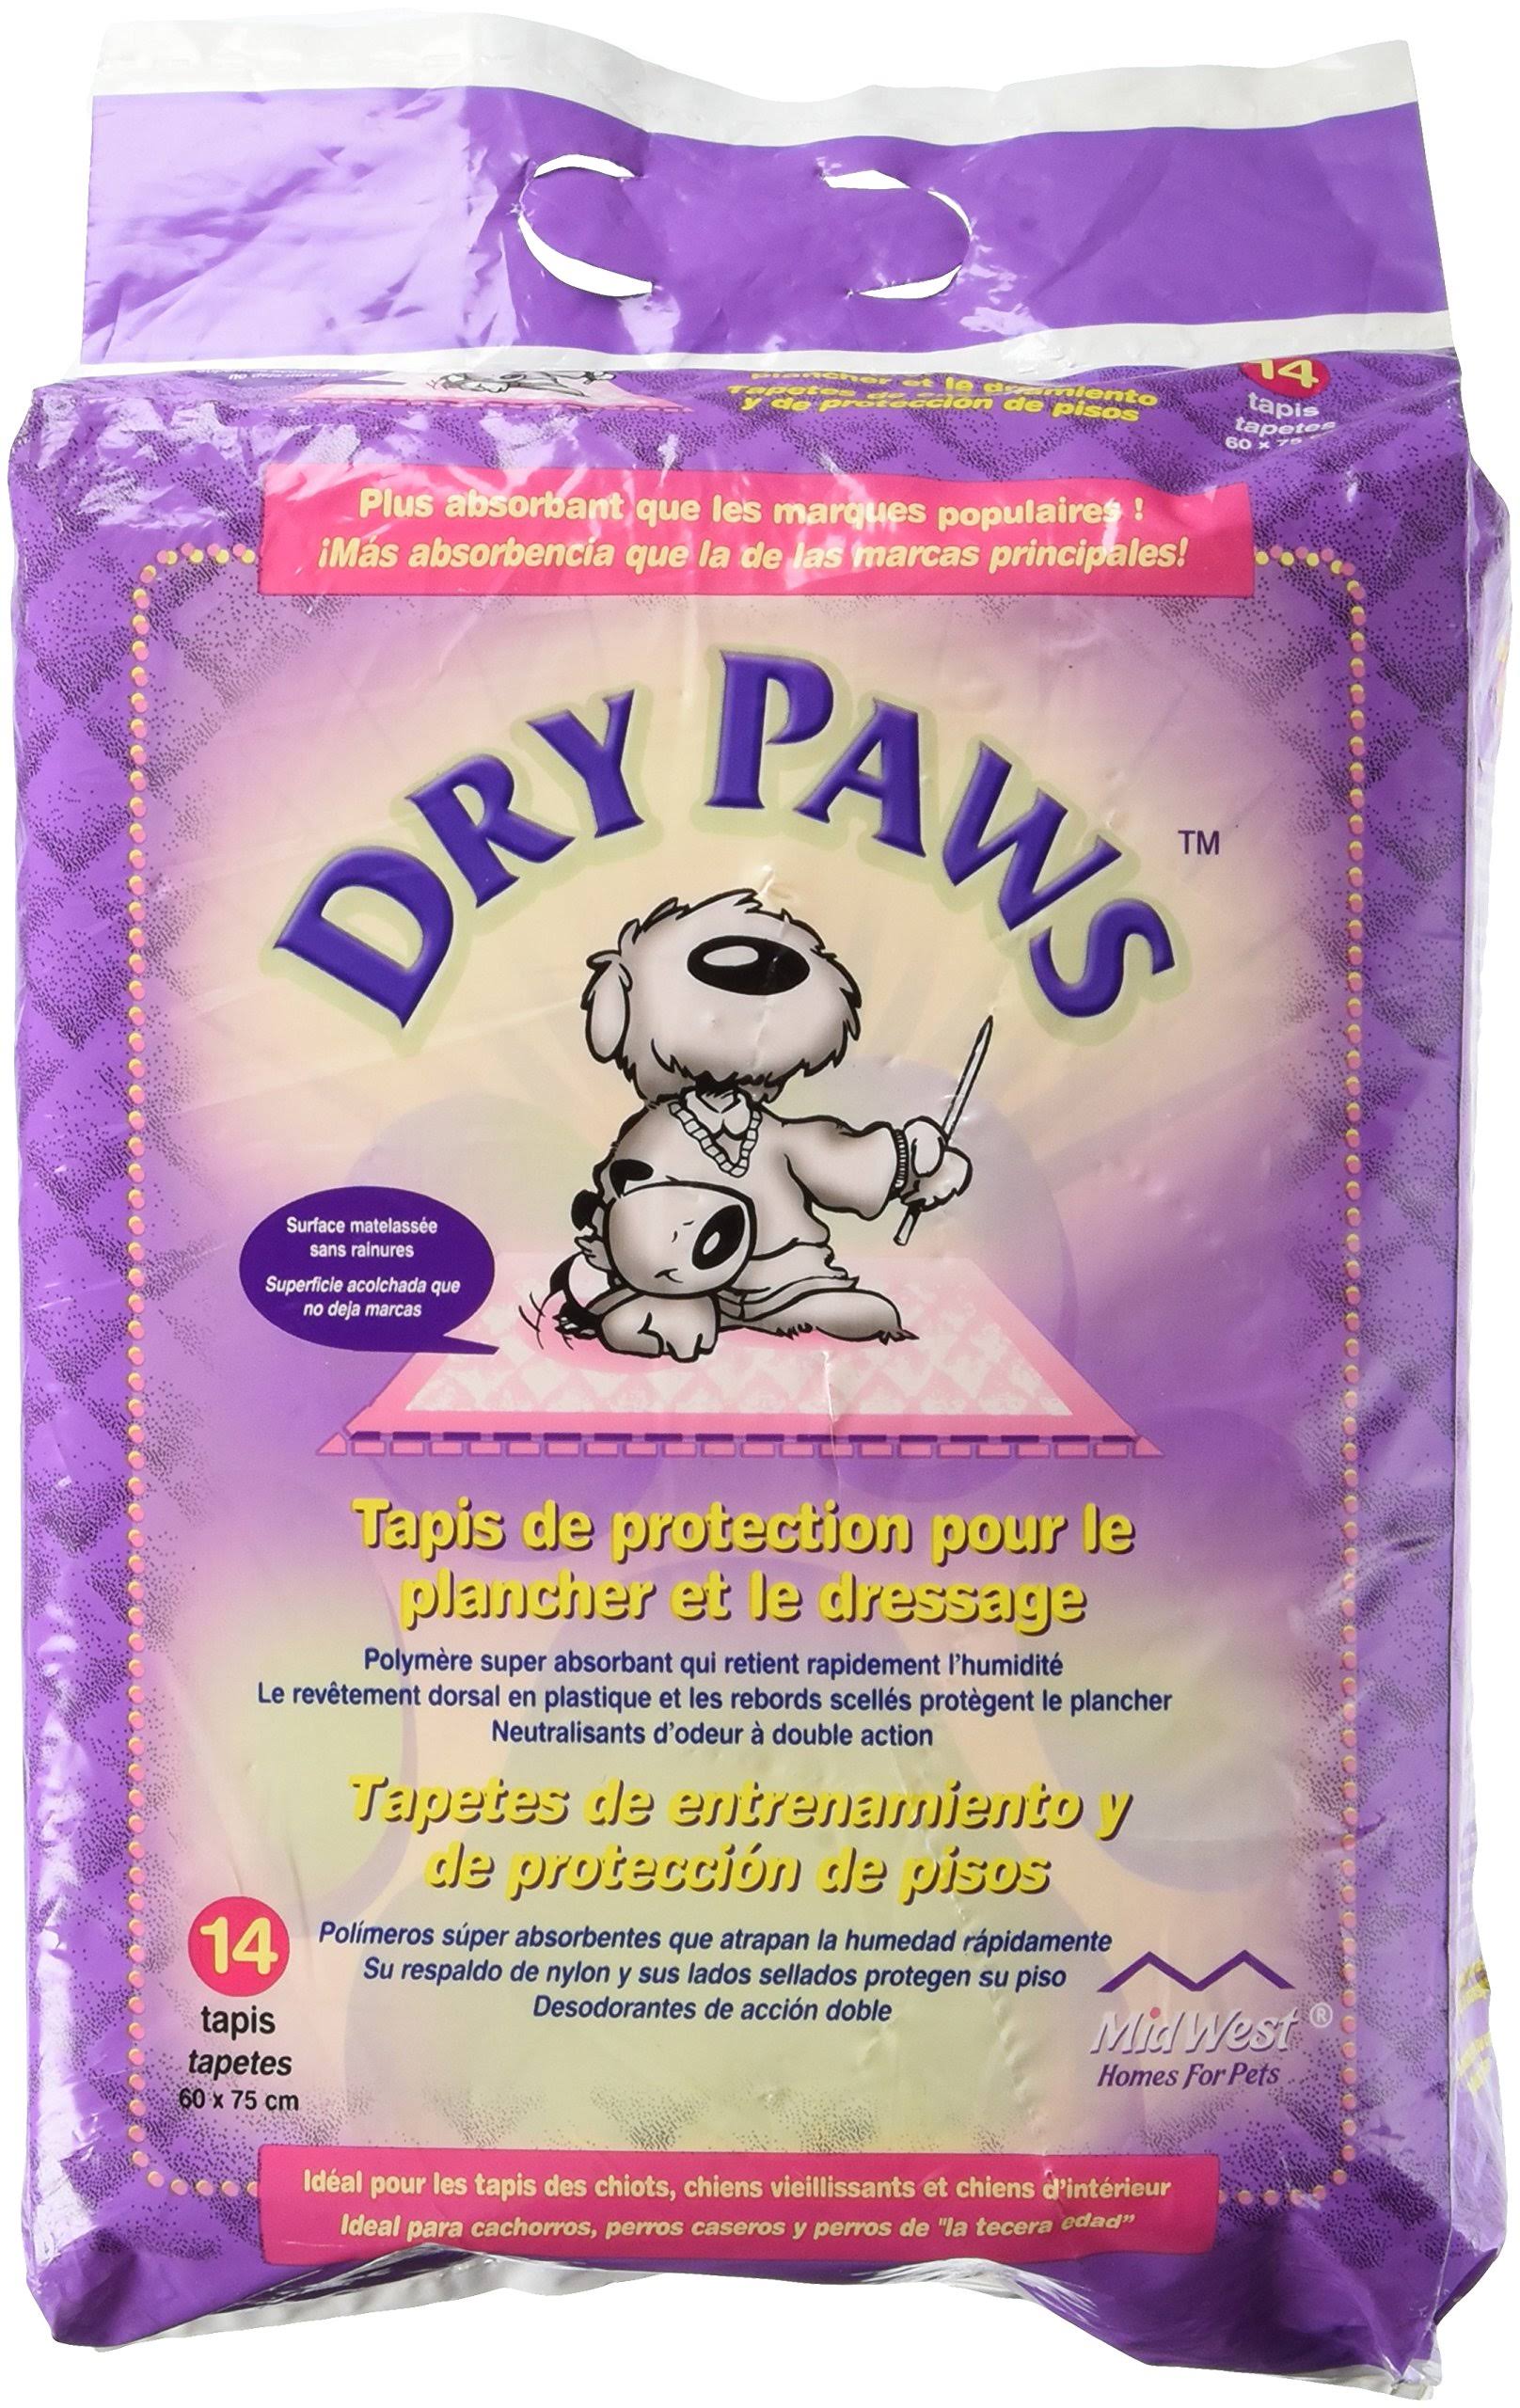 MidWest Dry Paws Training and Floor Protection Pads - X-Large, 14ct